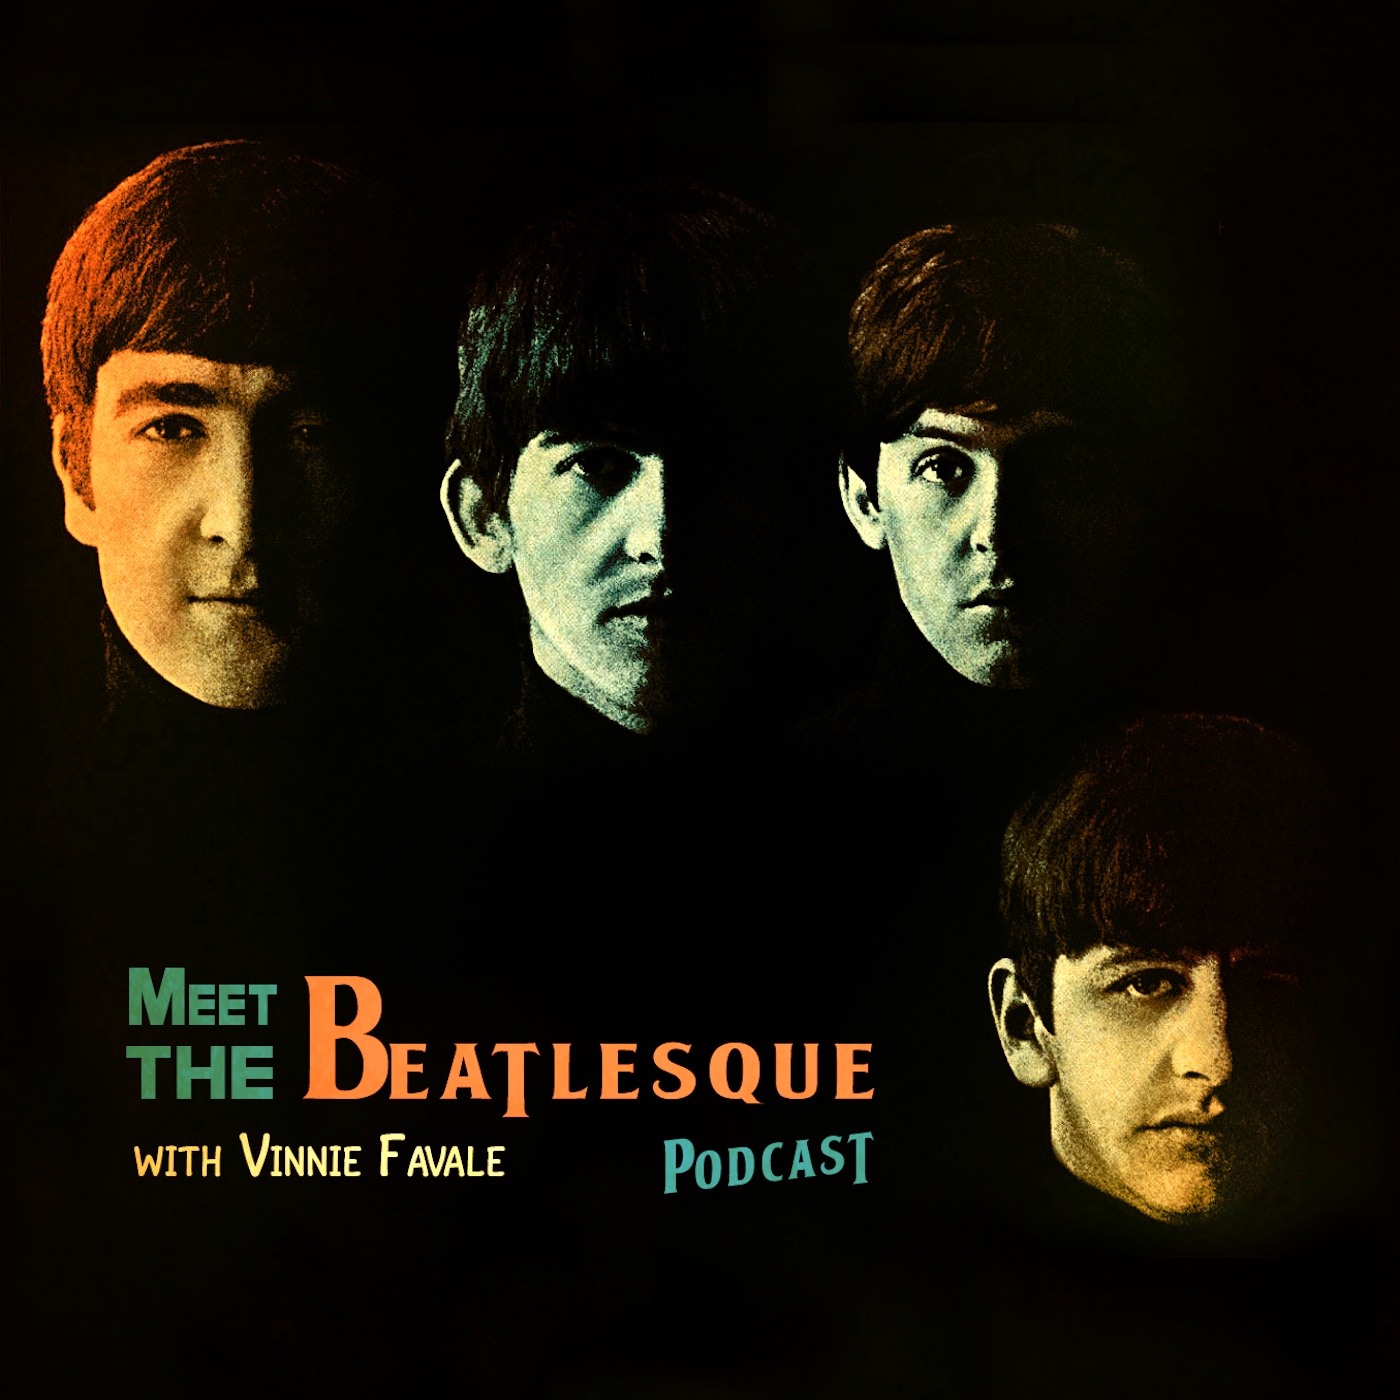 Meet The Beatlesque with Vinnie Favale - Show #4